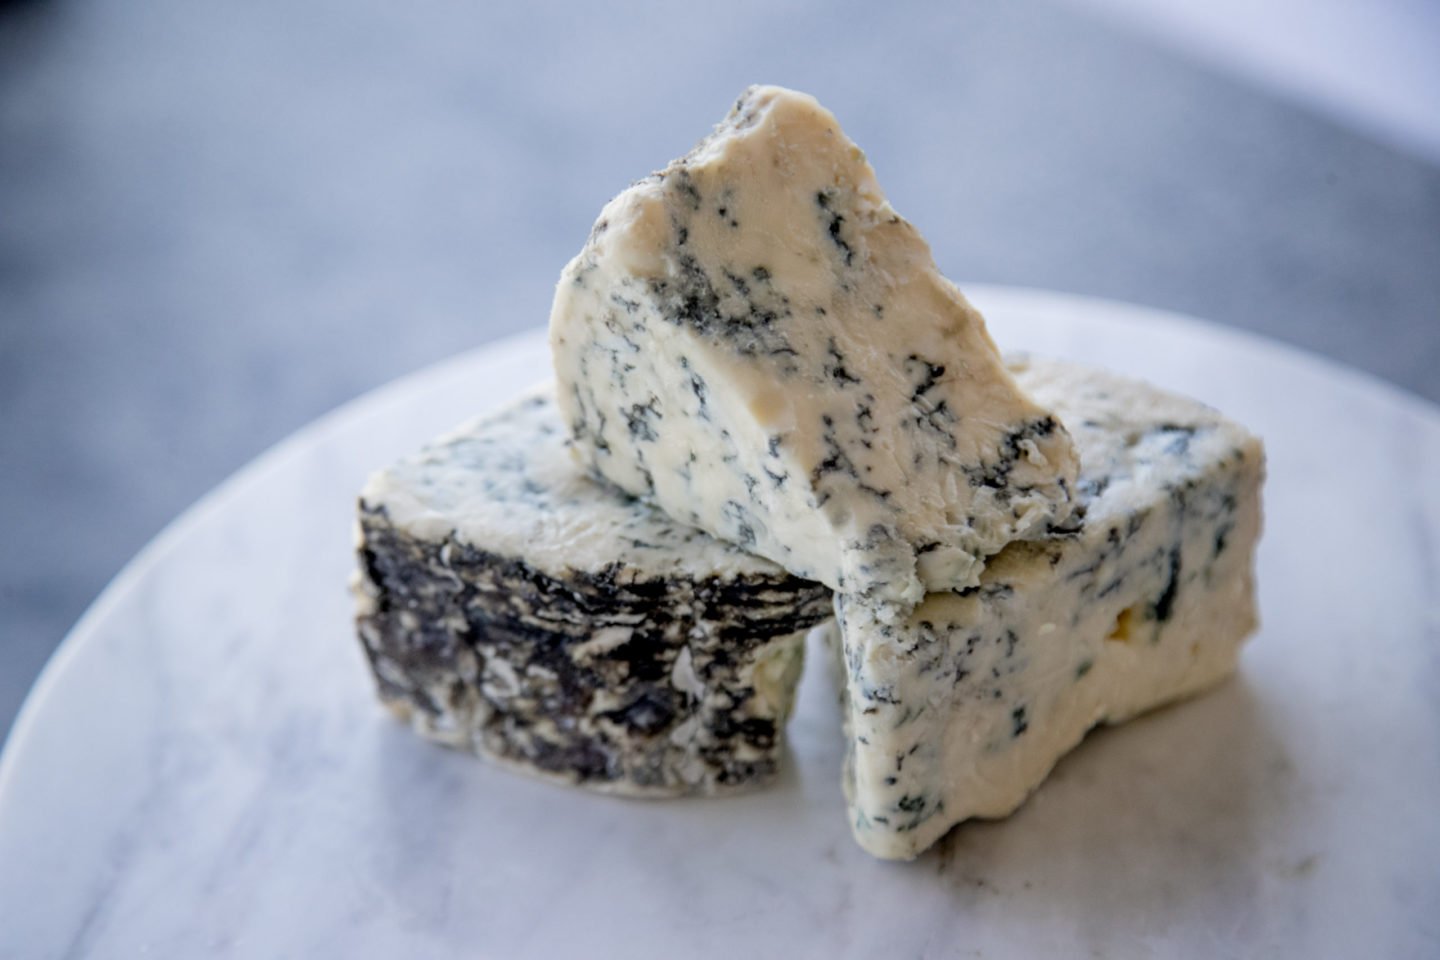 Maytag Blue Cheese 2020 1619 Scaled 1